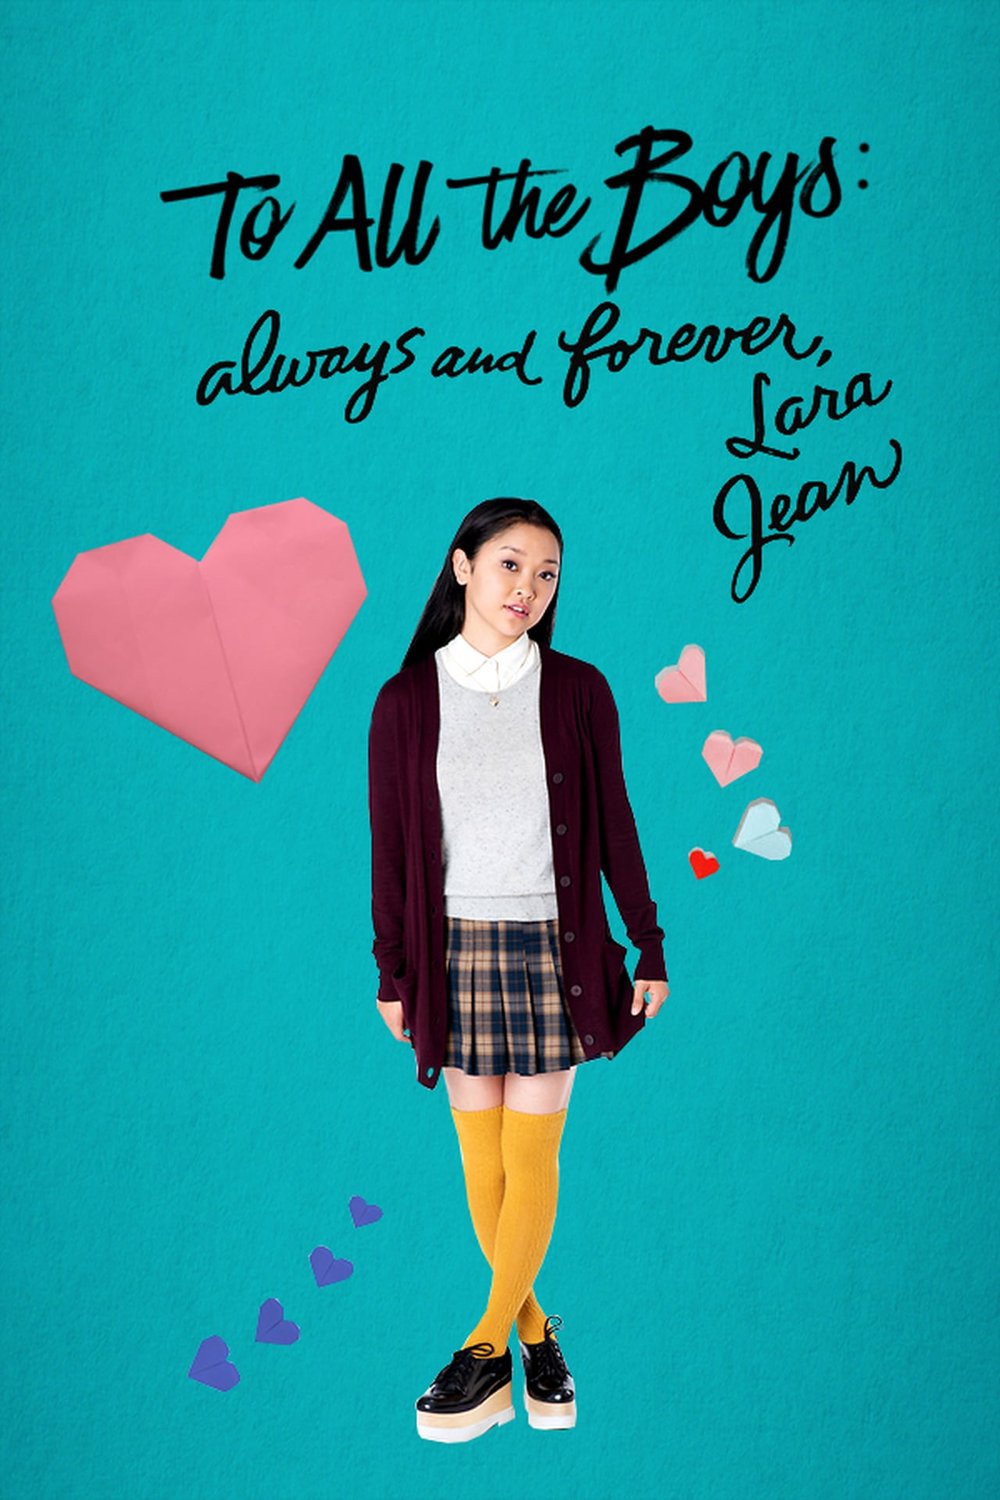 Poster of the movie To All the Boys: Always and Forever, Lara Jean